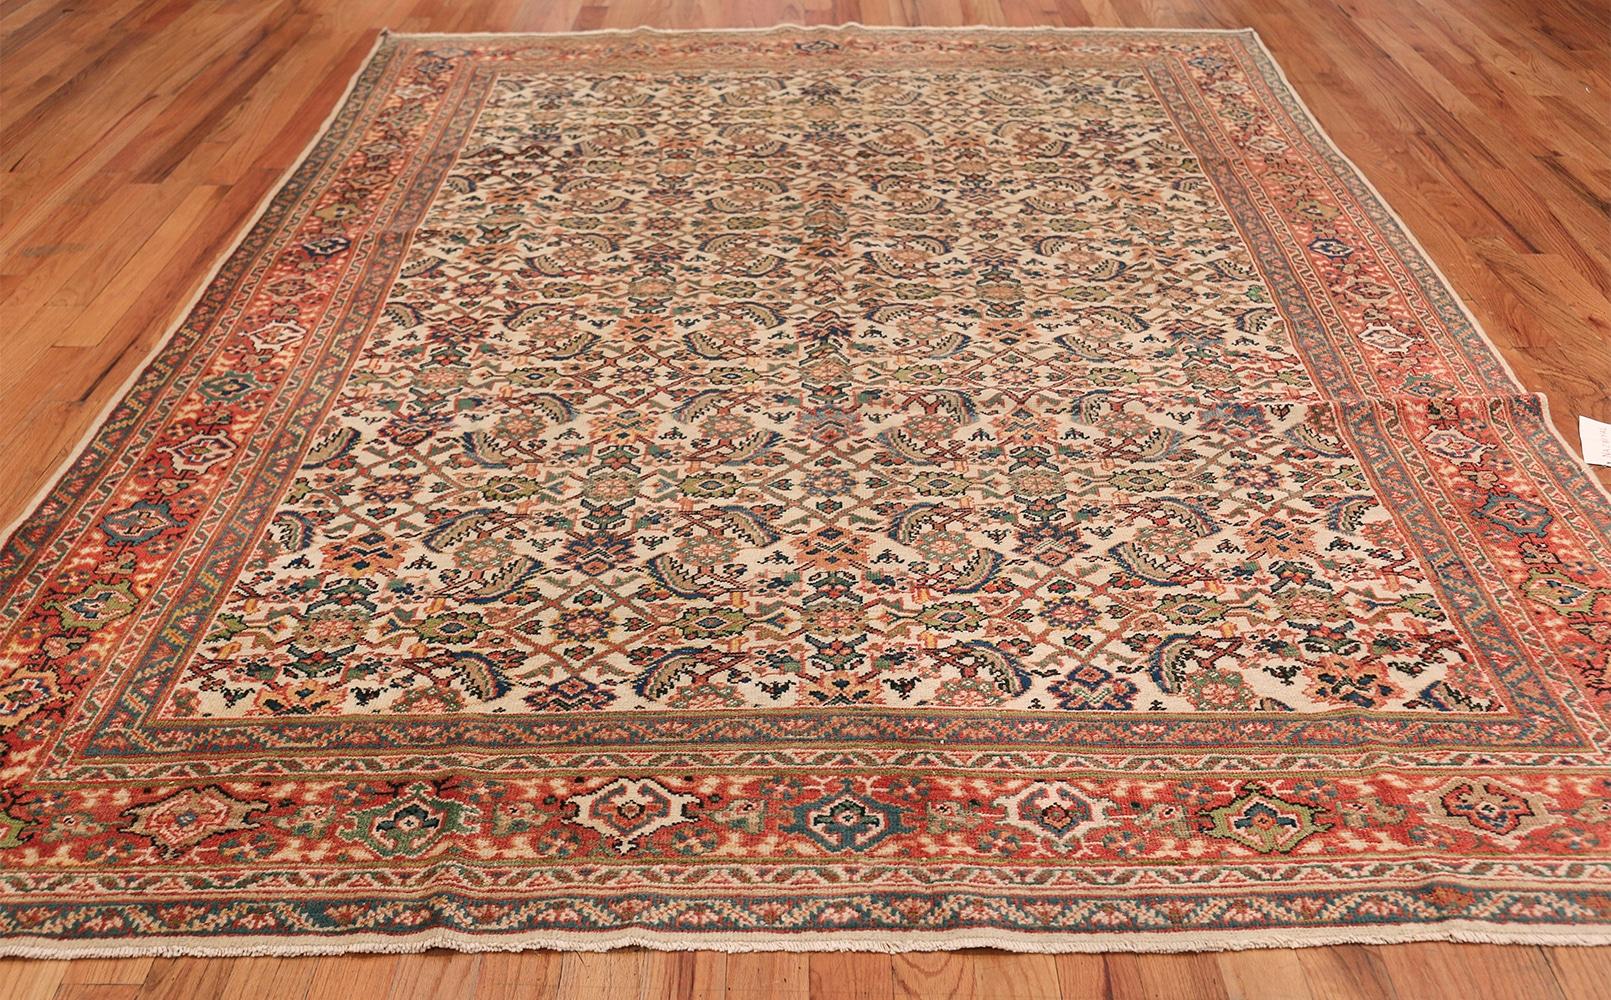 Antique Sultanabad carpet, Origin: Persia, circa 1920 -- Size: 8 ft x 10 ft 7 in (2.44 m x 3.23 m). 

The delightful display of colors and floral shapes in this Sultanabad rug create an almost living, breathing universe for the viewer to explore.